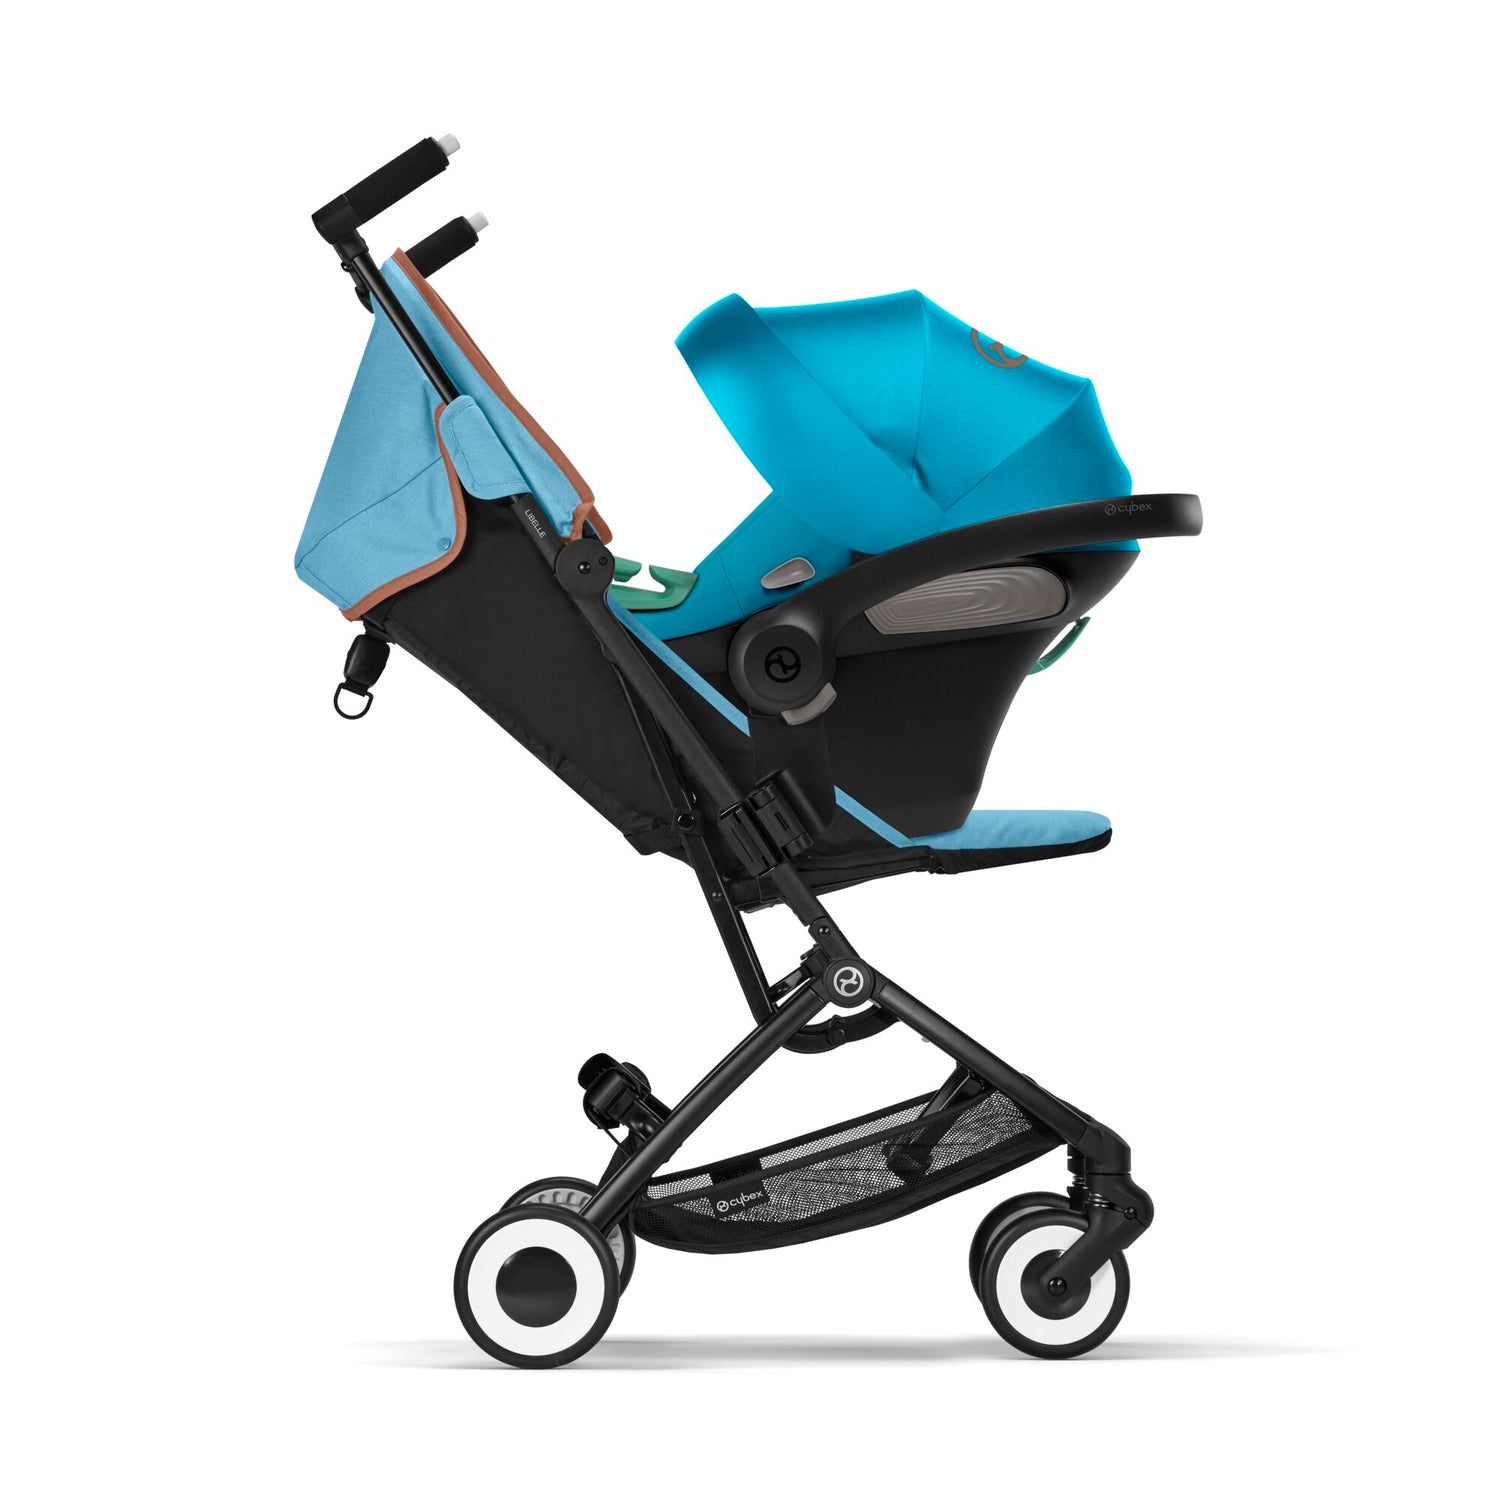 Buggy LIBELLE Cybex Gold bei www.harmony-ambiente.at | Buggy Libelle mit Babyschale